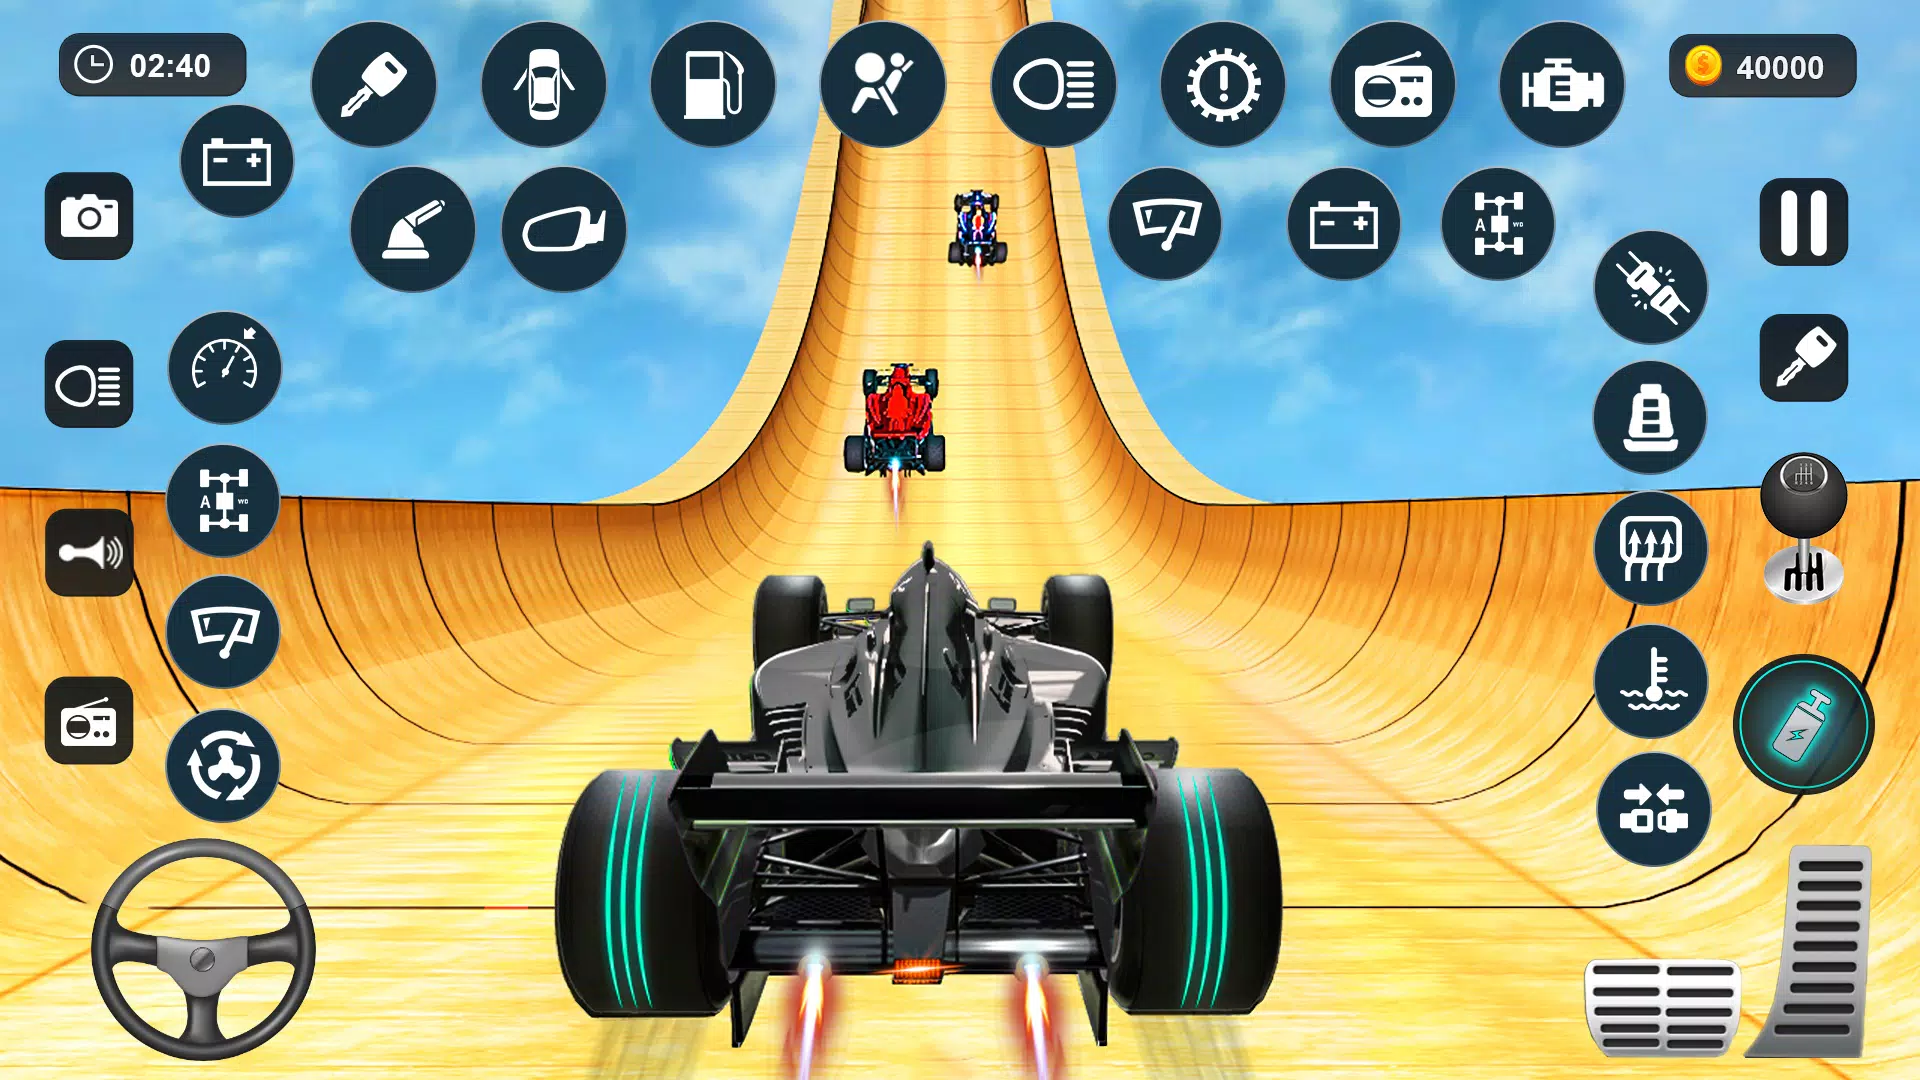 Download Car Parking Multiplayer APK for Android - free - latest